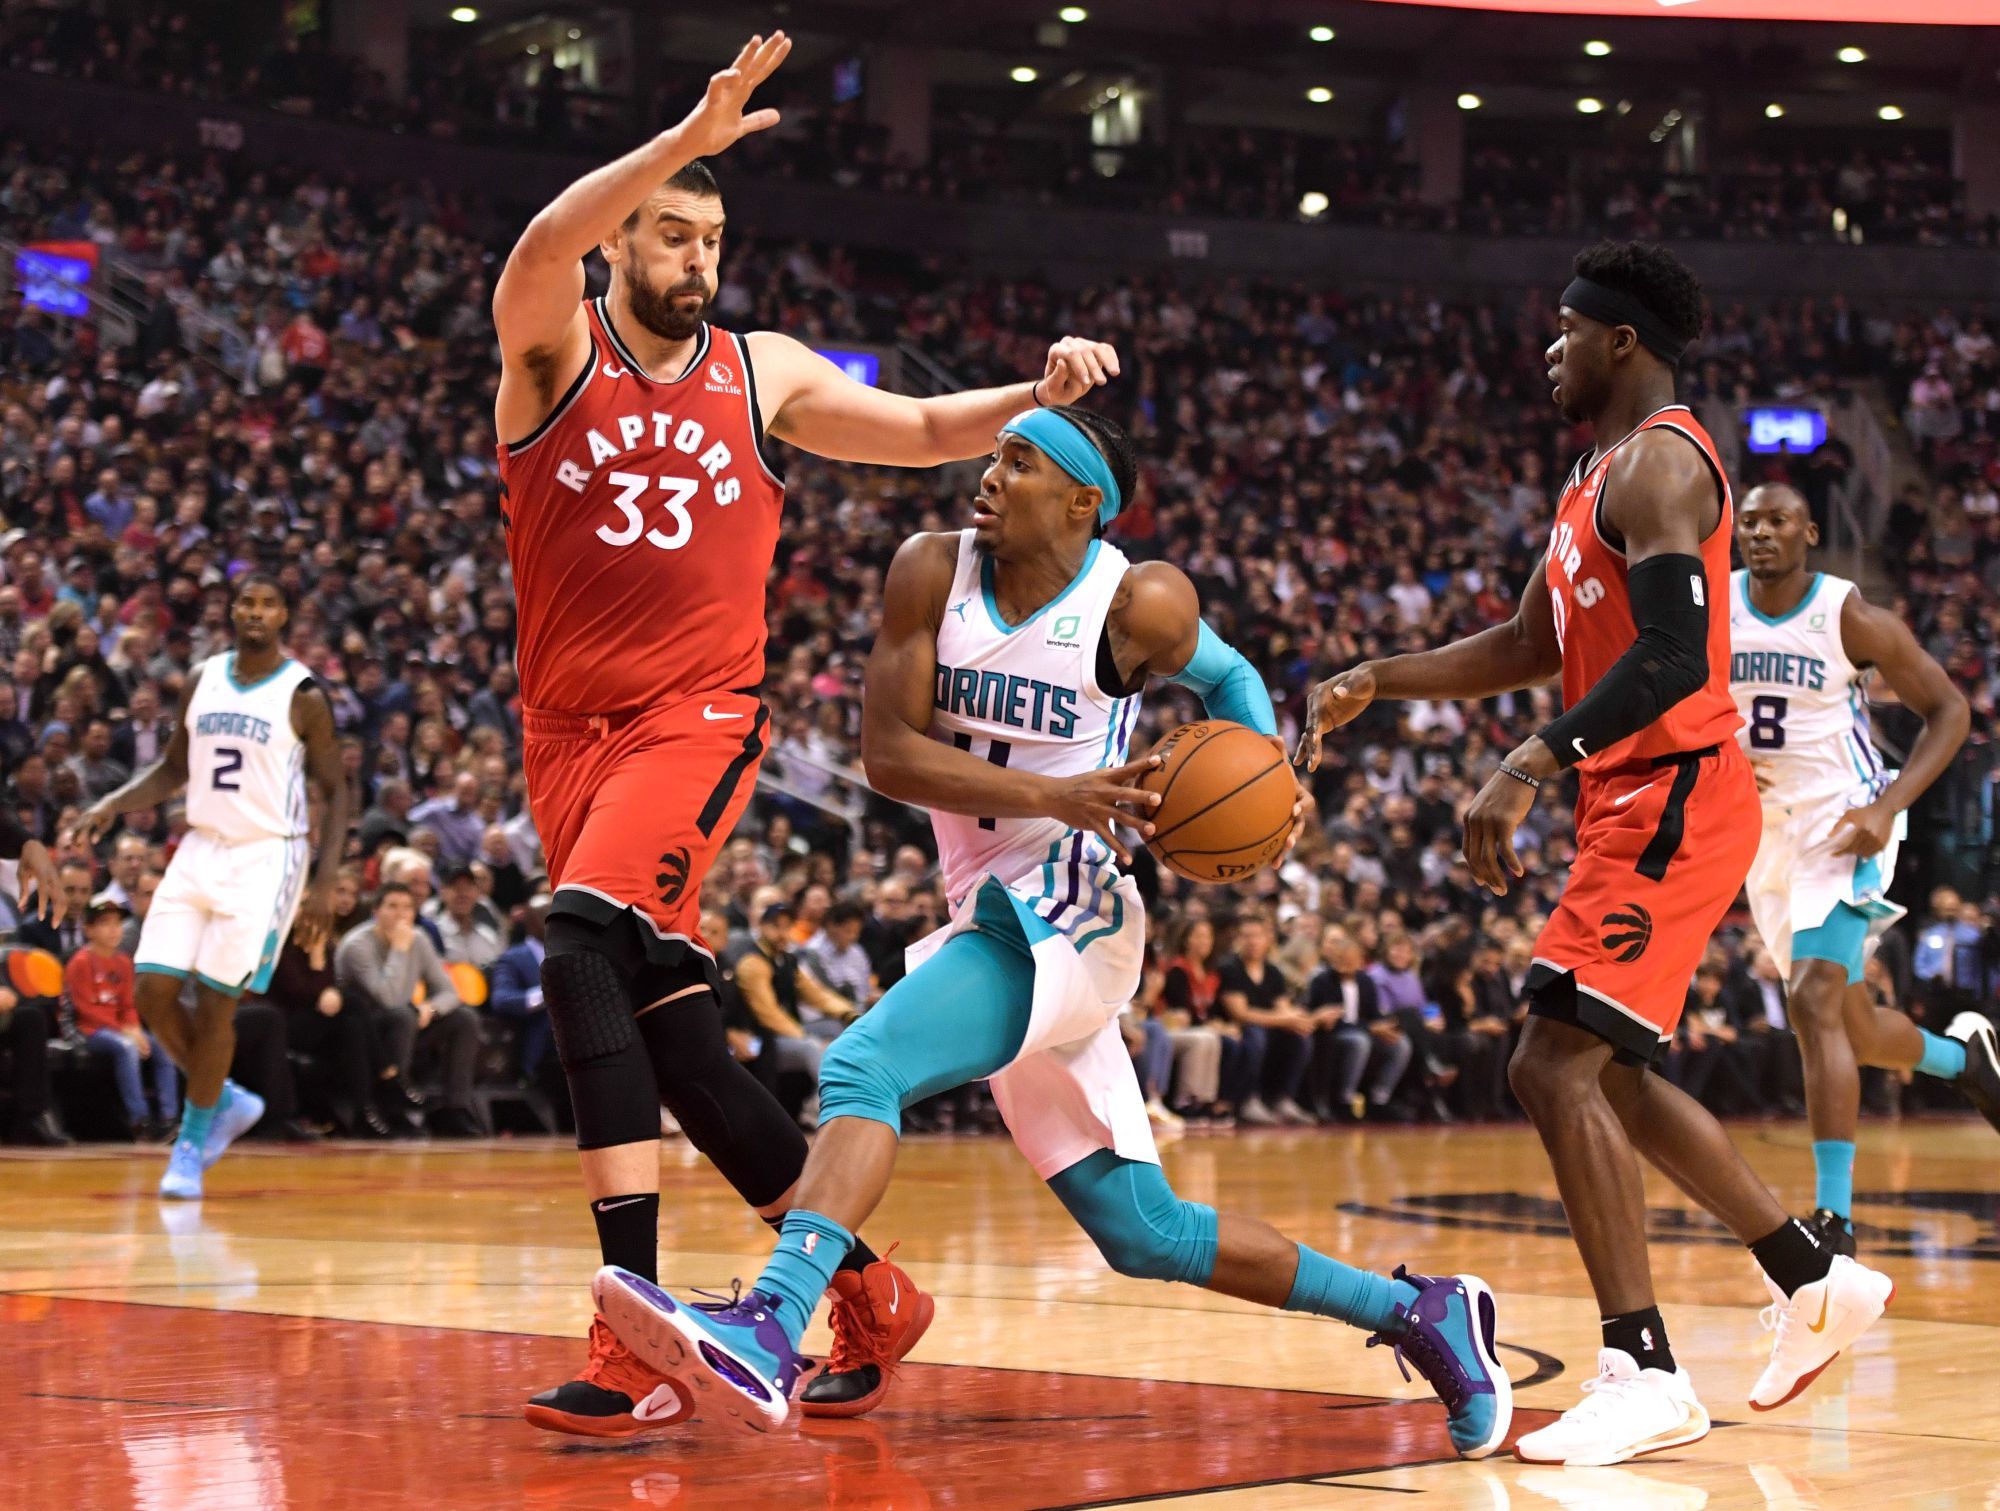 Nov 18, 2019; Toronto, Ontario, CAN;   Charlotte Hornets guard Devonte Graham (4) drives to the basket against Toronto Raptors center Marc Gasol (33) in the first half at Scotiabank Arena. Mandatory Credit: Dan Hamilton-USA TODAY Sports/Sipa USA 

Photo by Icon Sport - Marc GASOL - Devonte GRAHAM - Scotiabank Arena - Toronto (Canada)